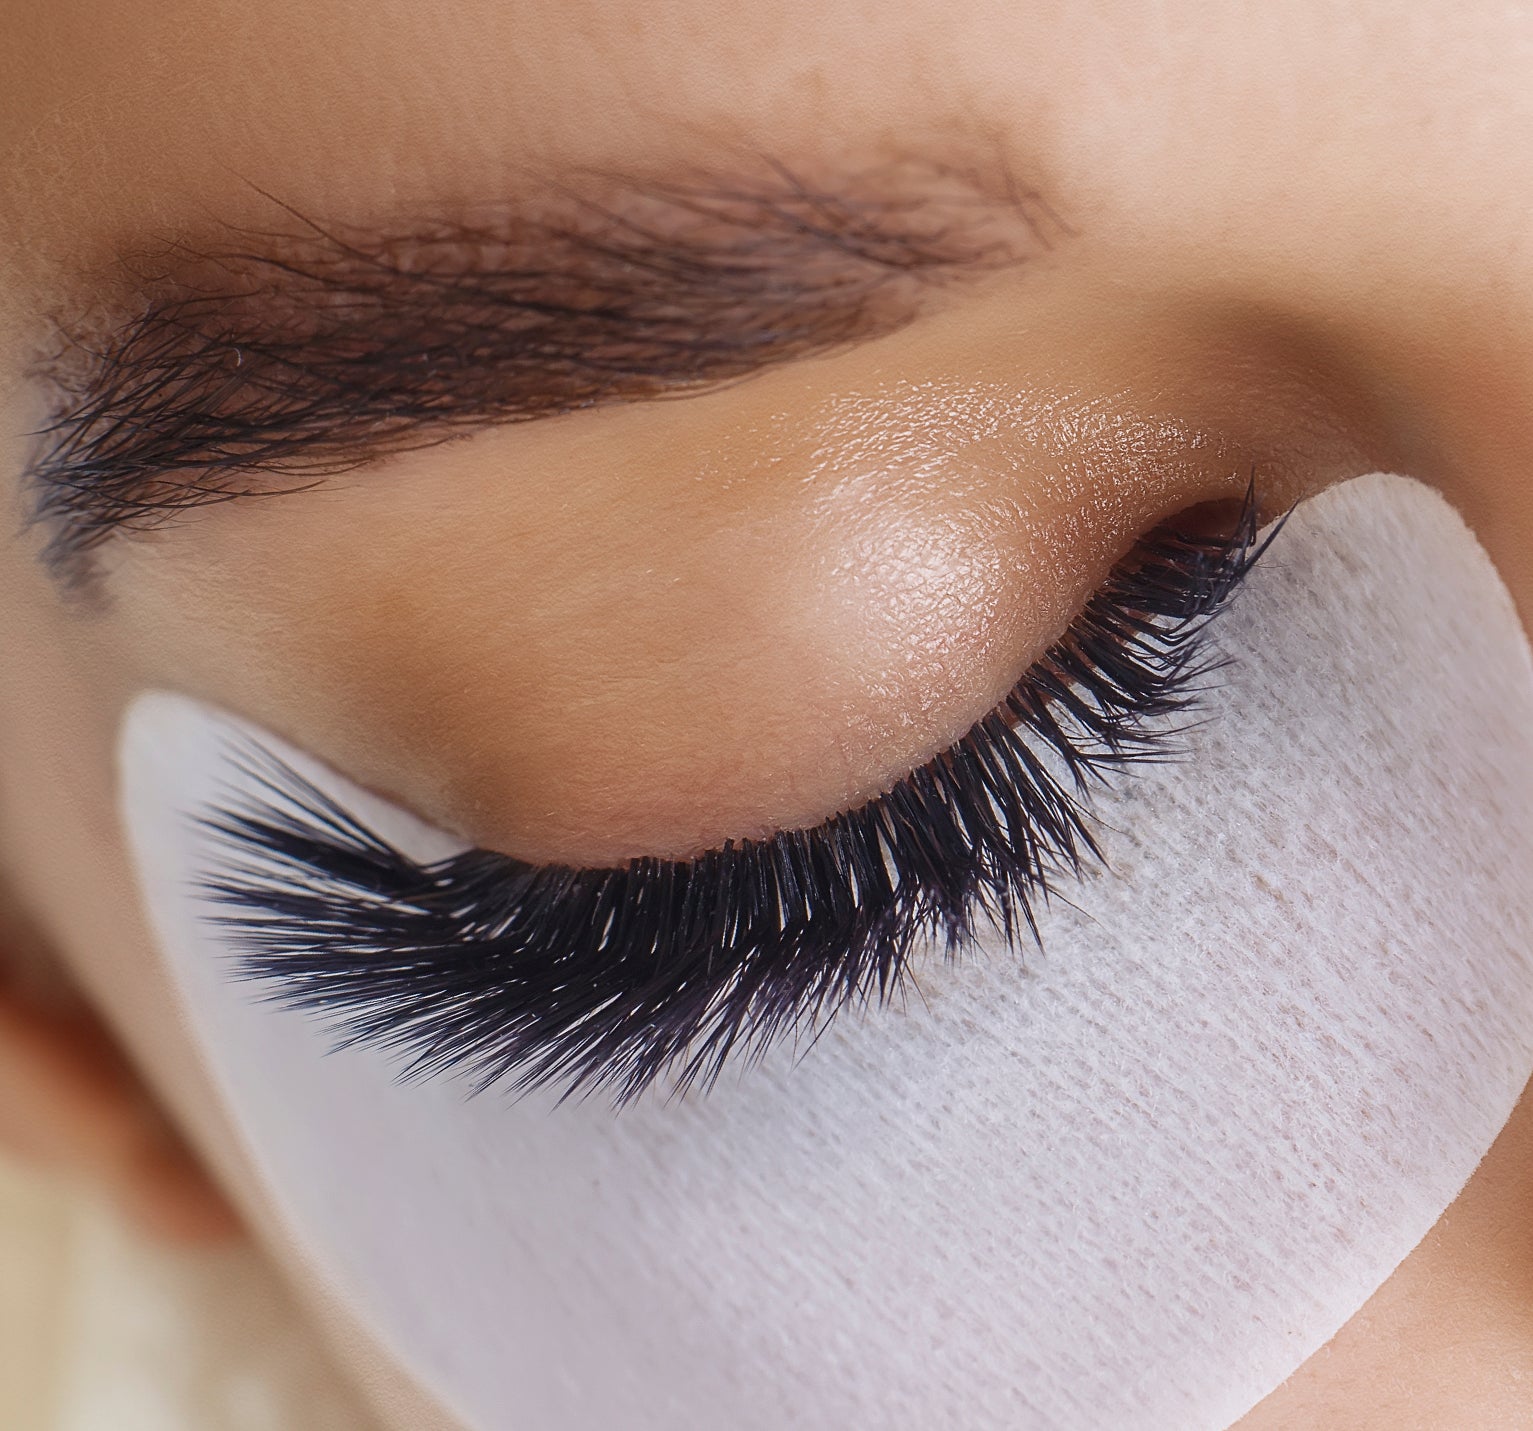 Eyelash Extension Room: 5 Tips to Set Yours Up - The Lash Professional